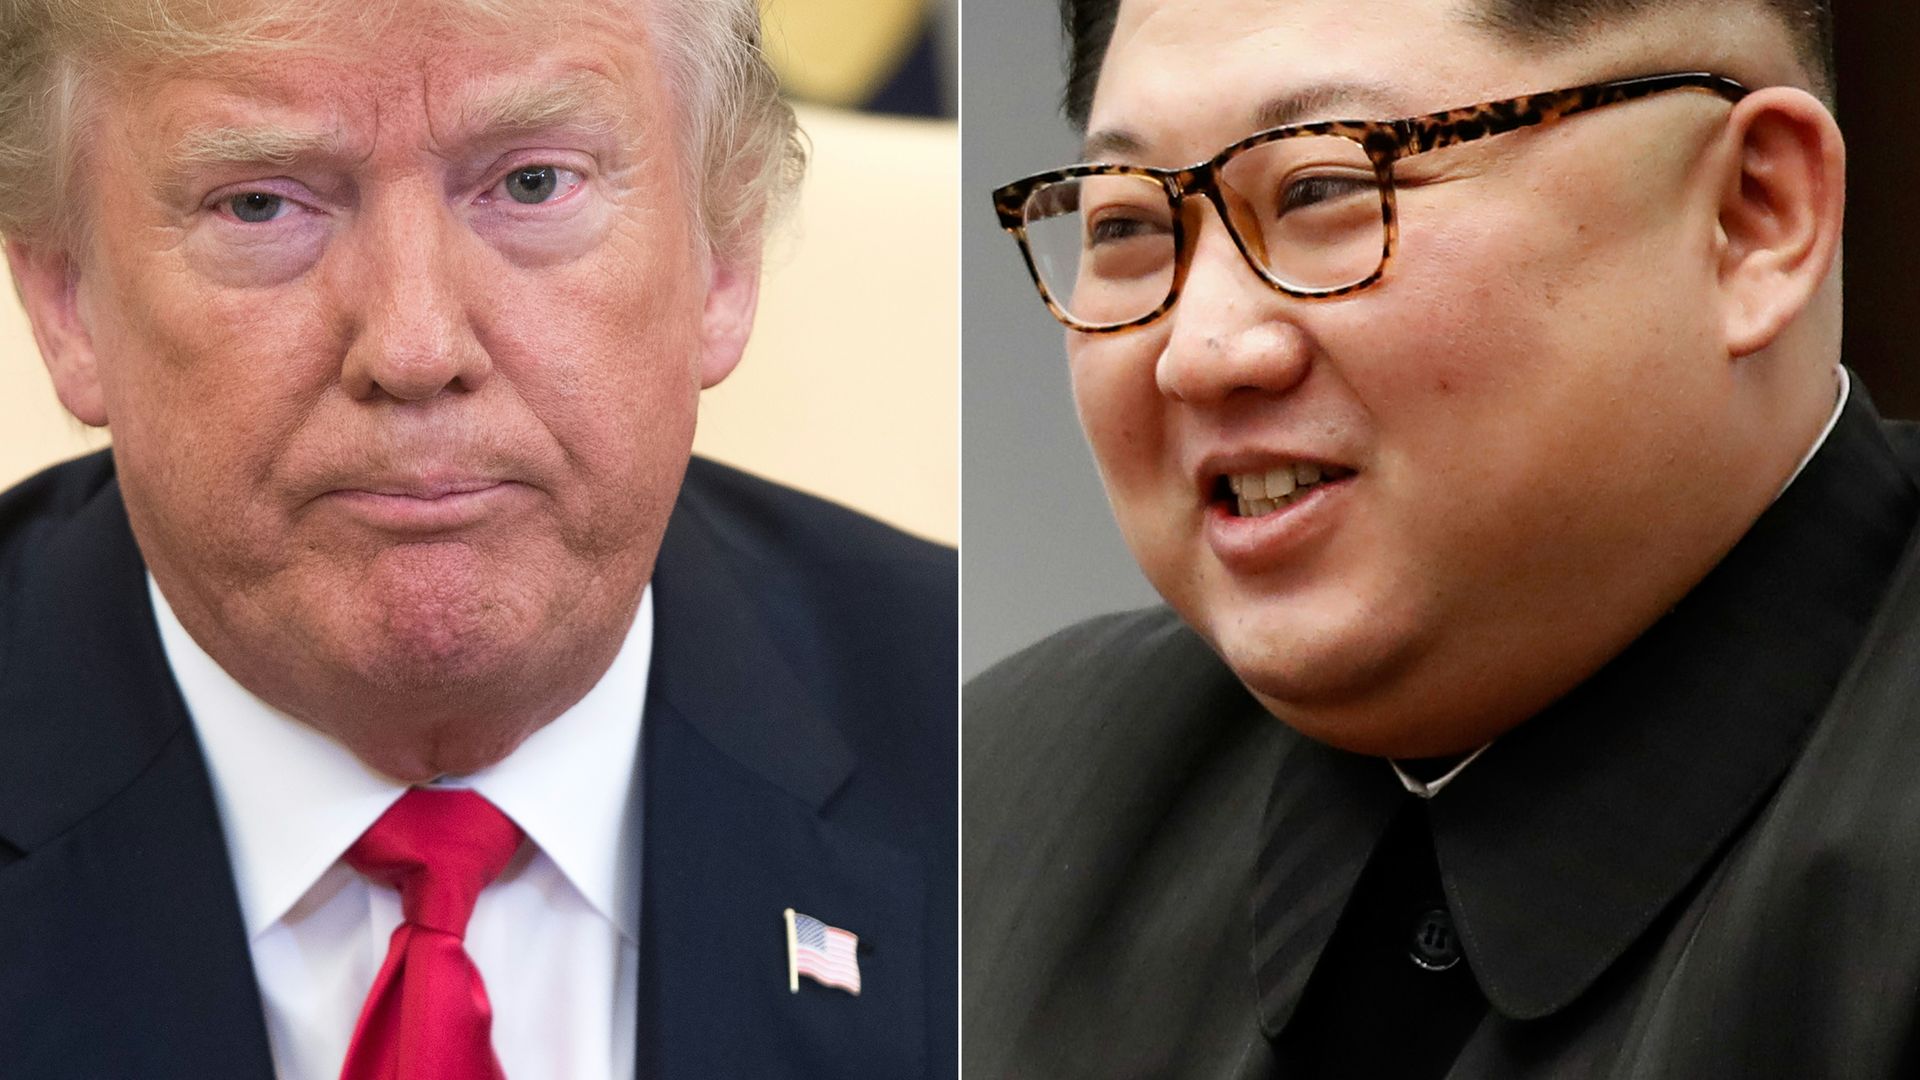 Donald Trump in the Oval Office on May 17, 2018, and Kim Jong-un during the inter-Korean summit in Panmunjom on April 27, 2018.